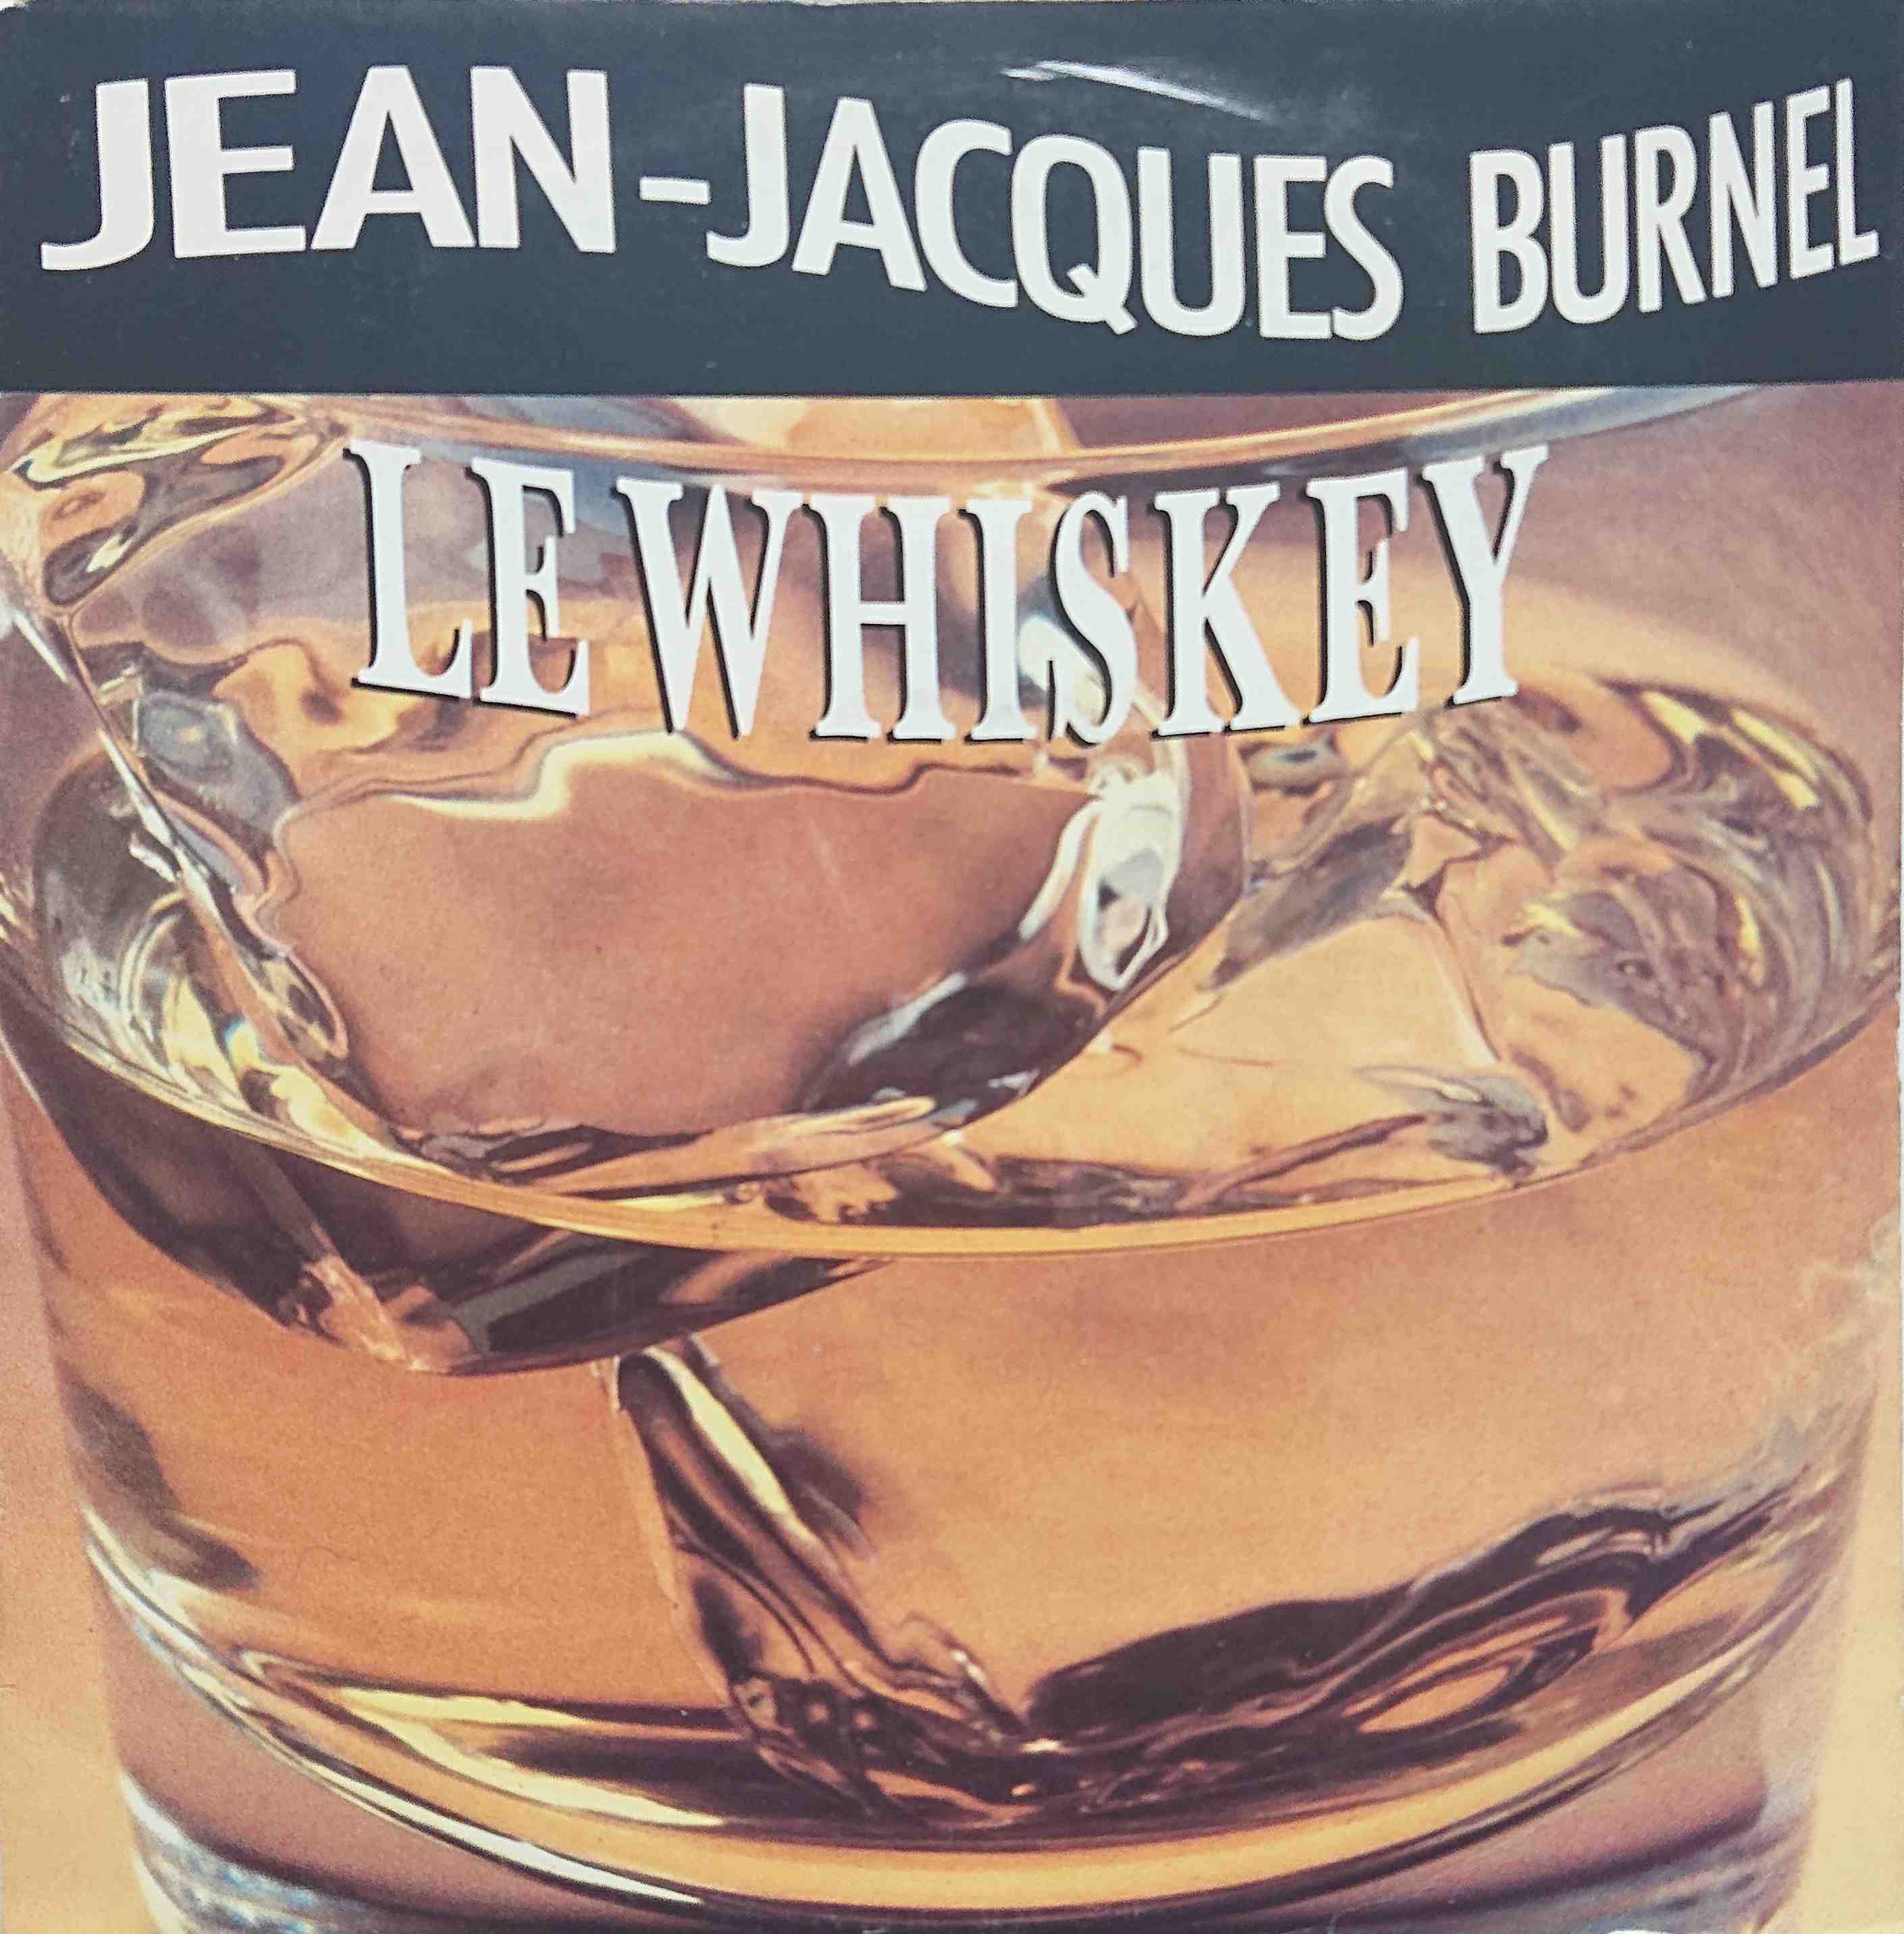 Picture of Le whiskey - French import by artist Jean Jacques Burnel from The Stranglers singles